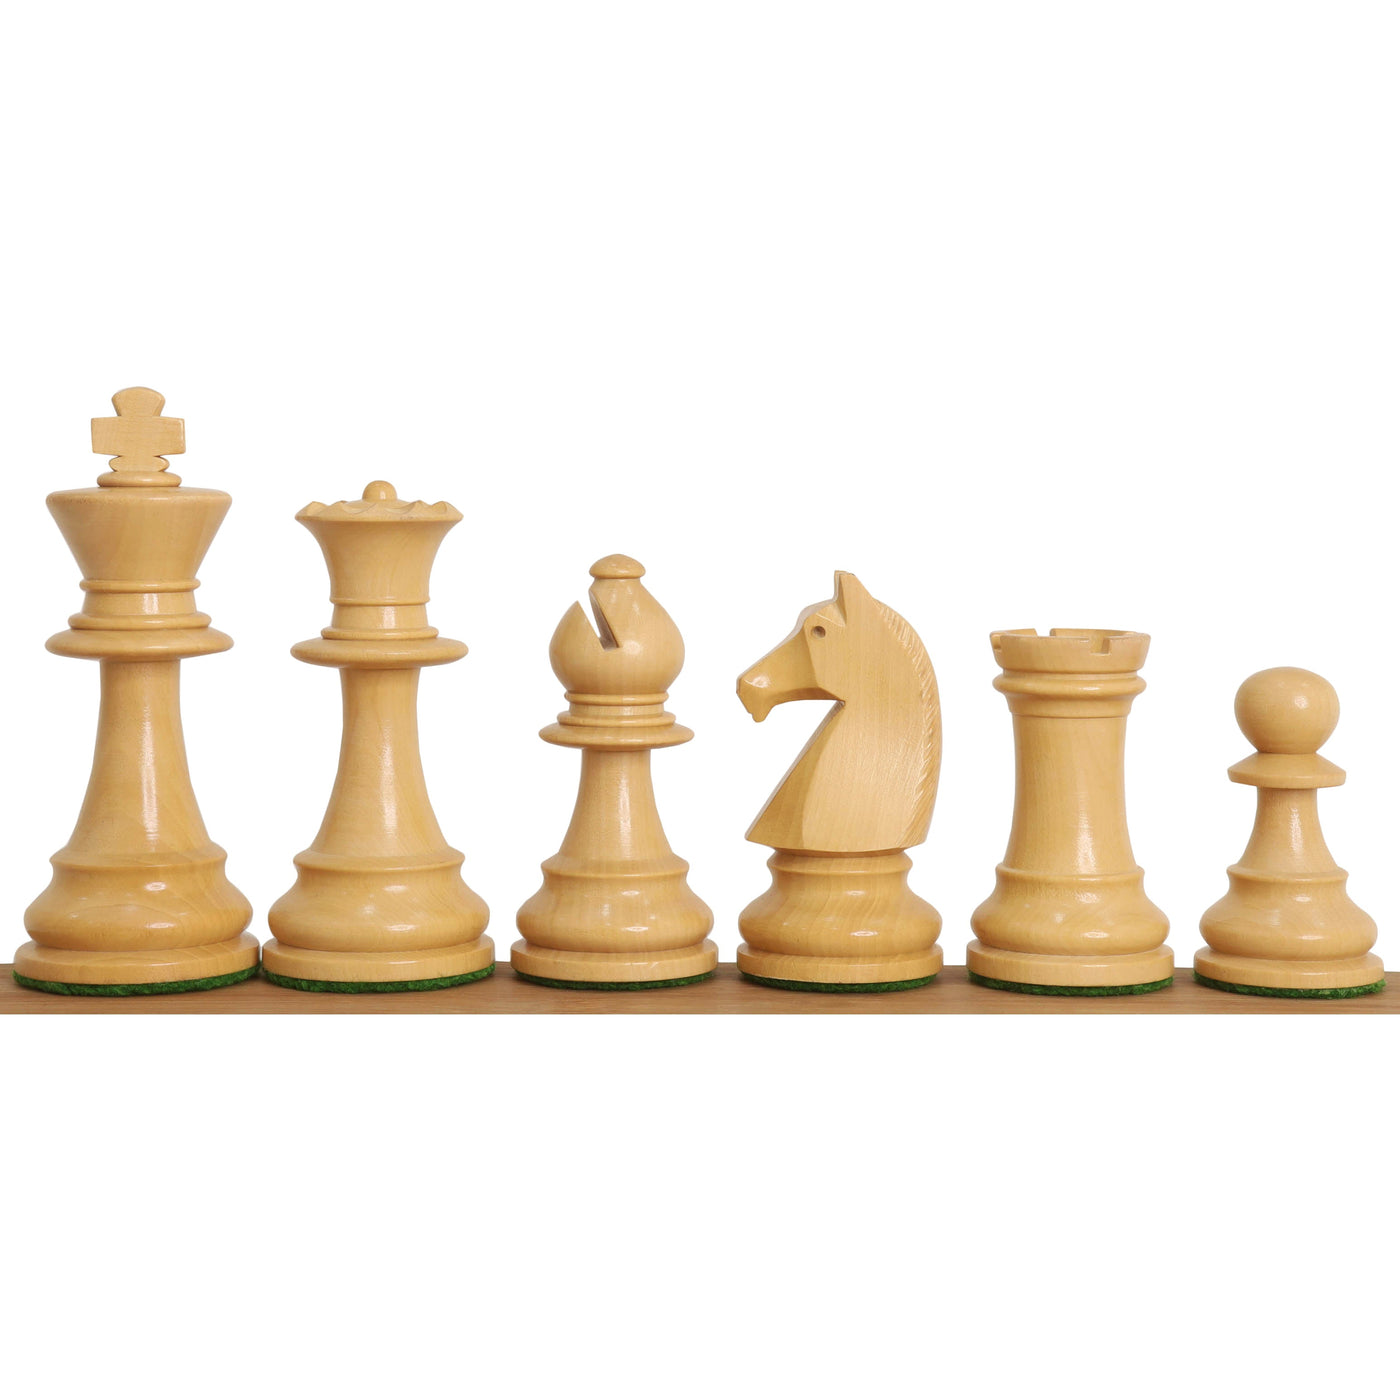 3.9" French Chavet Tournament Chess Set - Chess Pieces Only - Mahogany Stained & Boxwood